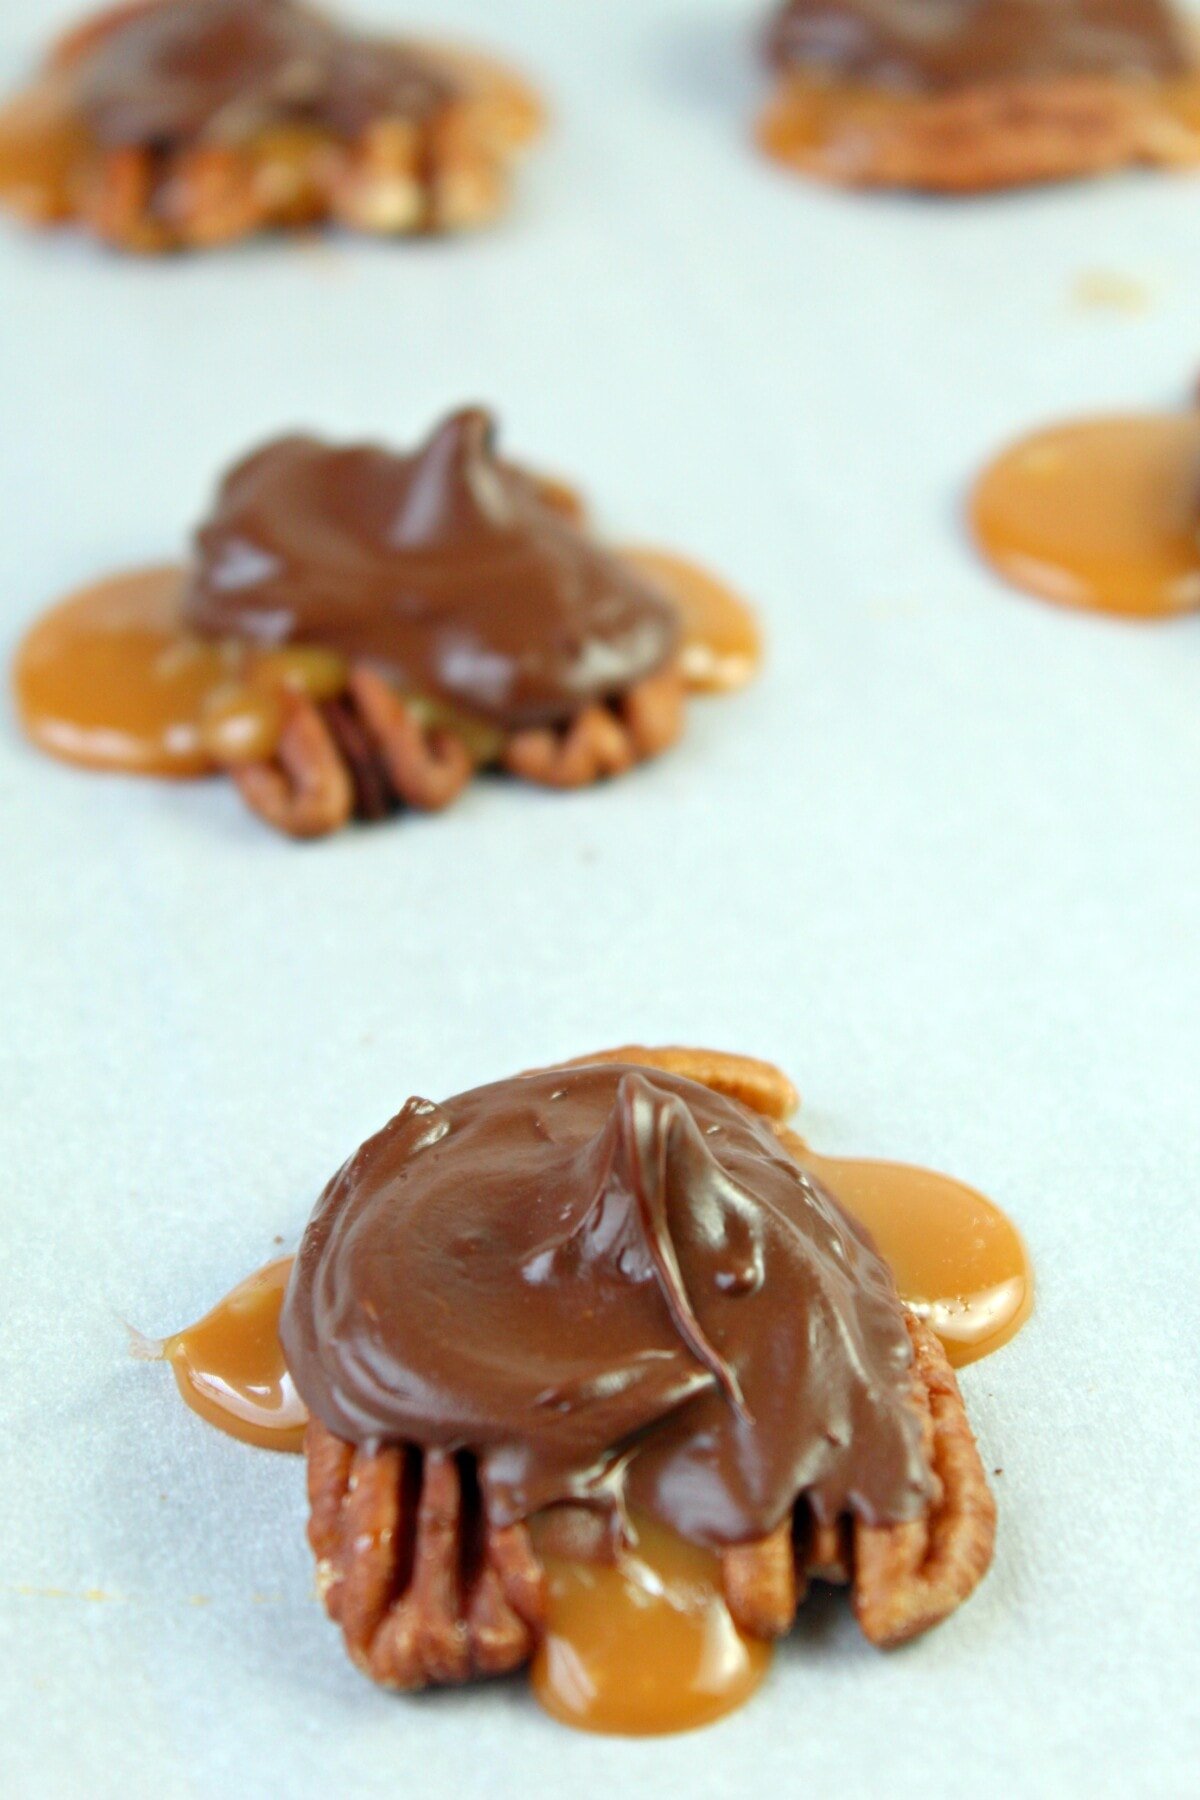 Chocolate Turtle Clusters on wax paper
